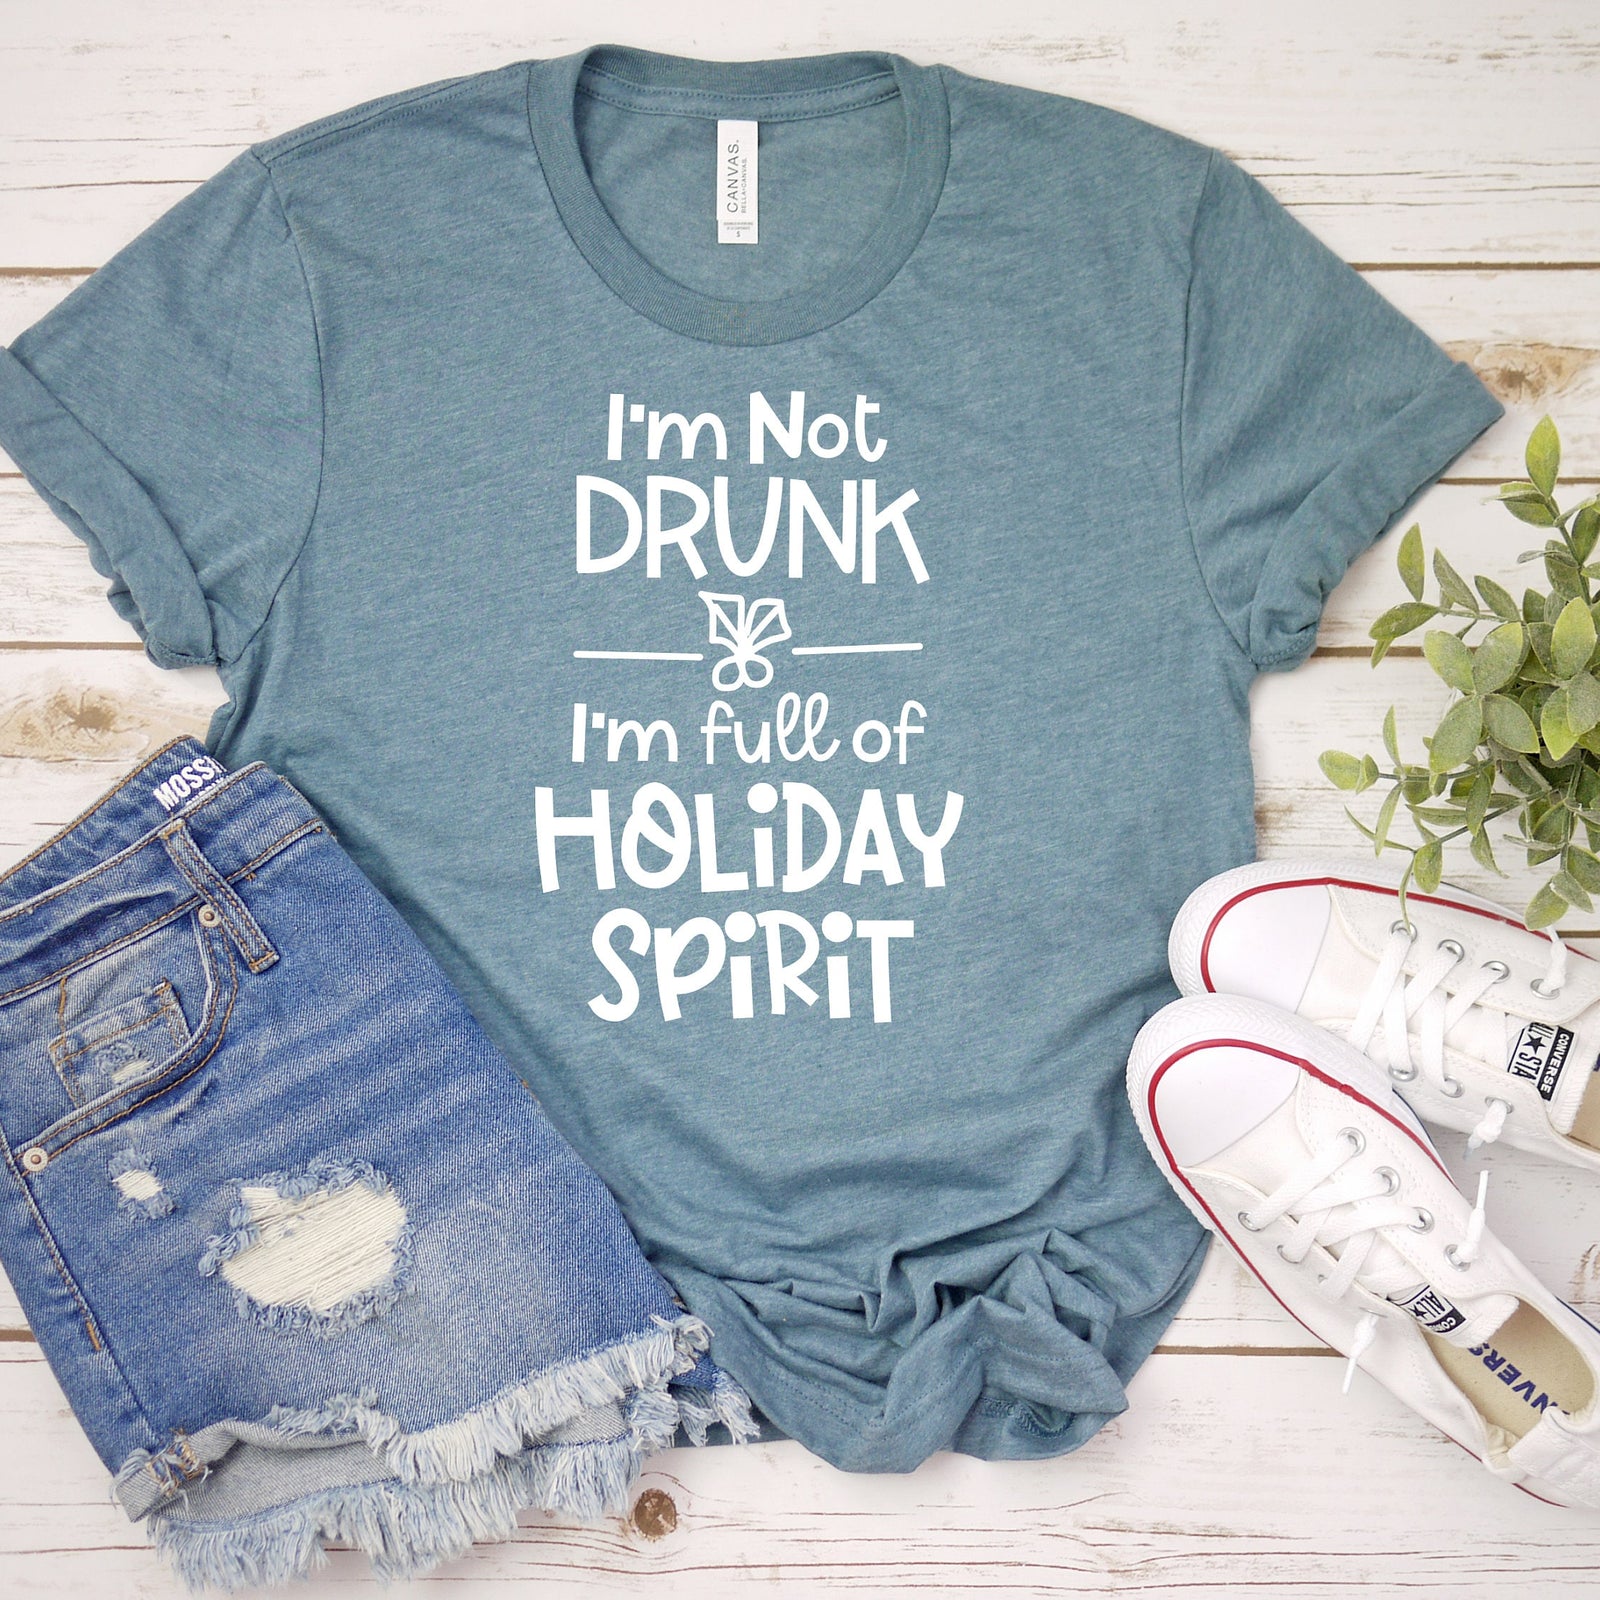 I'm not Drunk - I'm Full of Holiday Spirit Christmas T Shirt - Wine Lover T Shirt - Funny Christmas Party Matching Shirt Gift